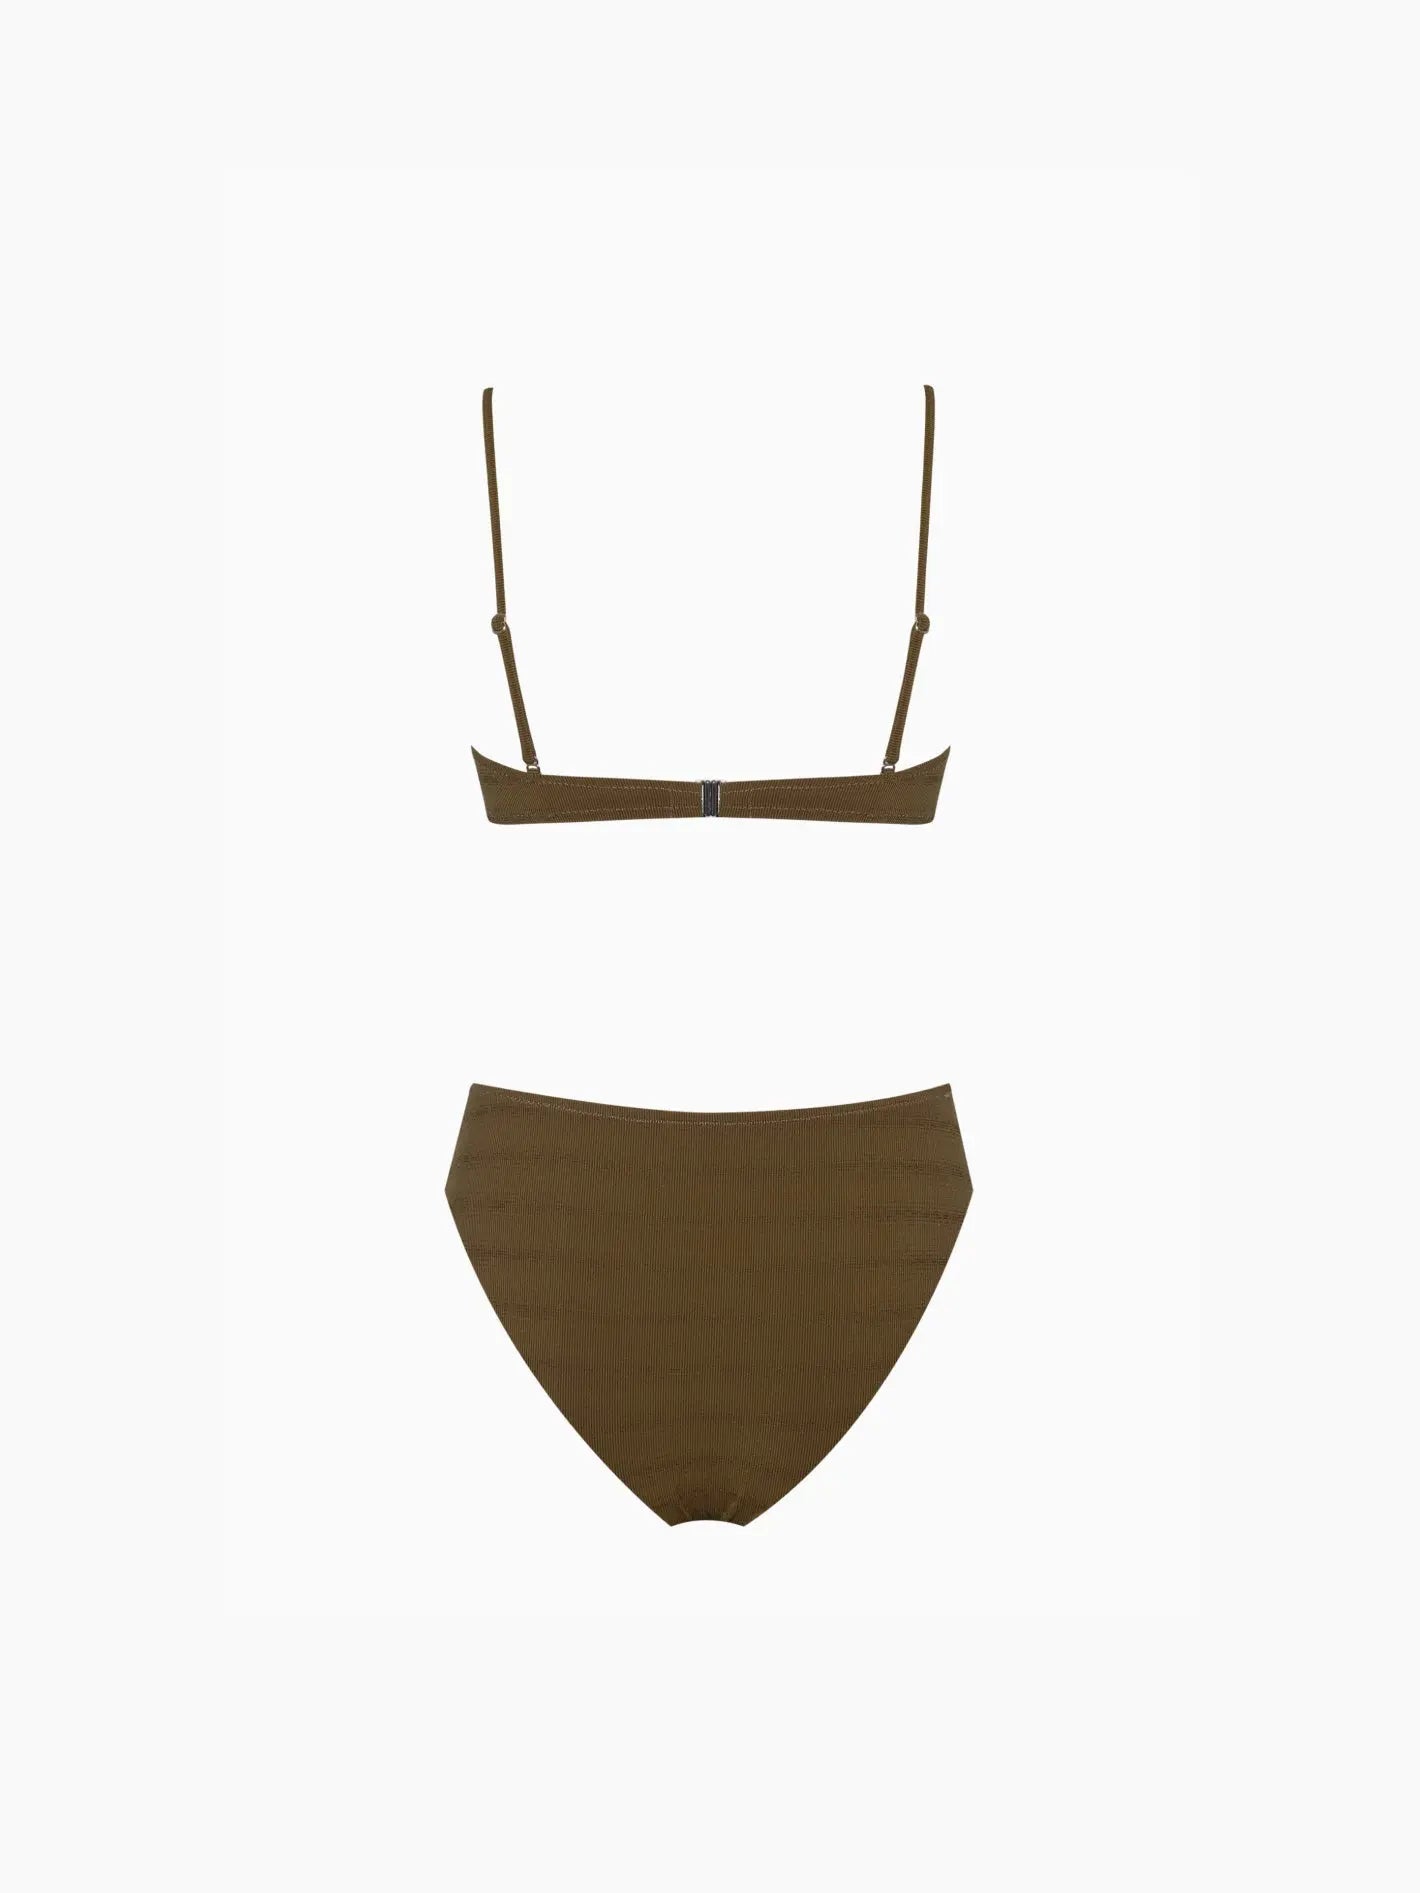 A two-piece brown bikini set from Bassalstore is displayed against a white background. The top features thin straps and a slight sweetheart neckline, while the bottom boasts a classic high-cut style. Discover this chic swimwear piece inspired by the vibrant flair of Barcelona. Replace it with the Pale Olimpia Bikini Khaki for an equally stylish option.